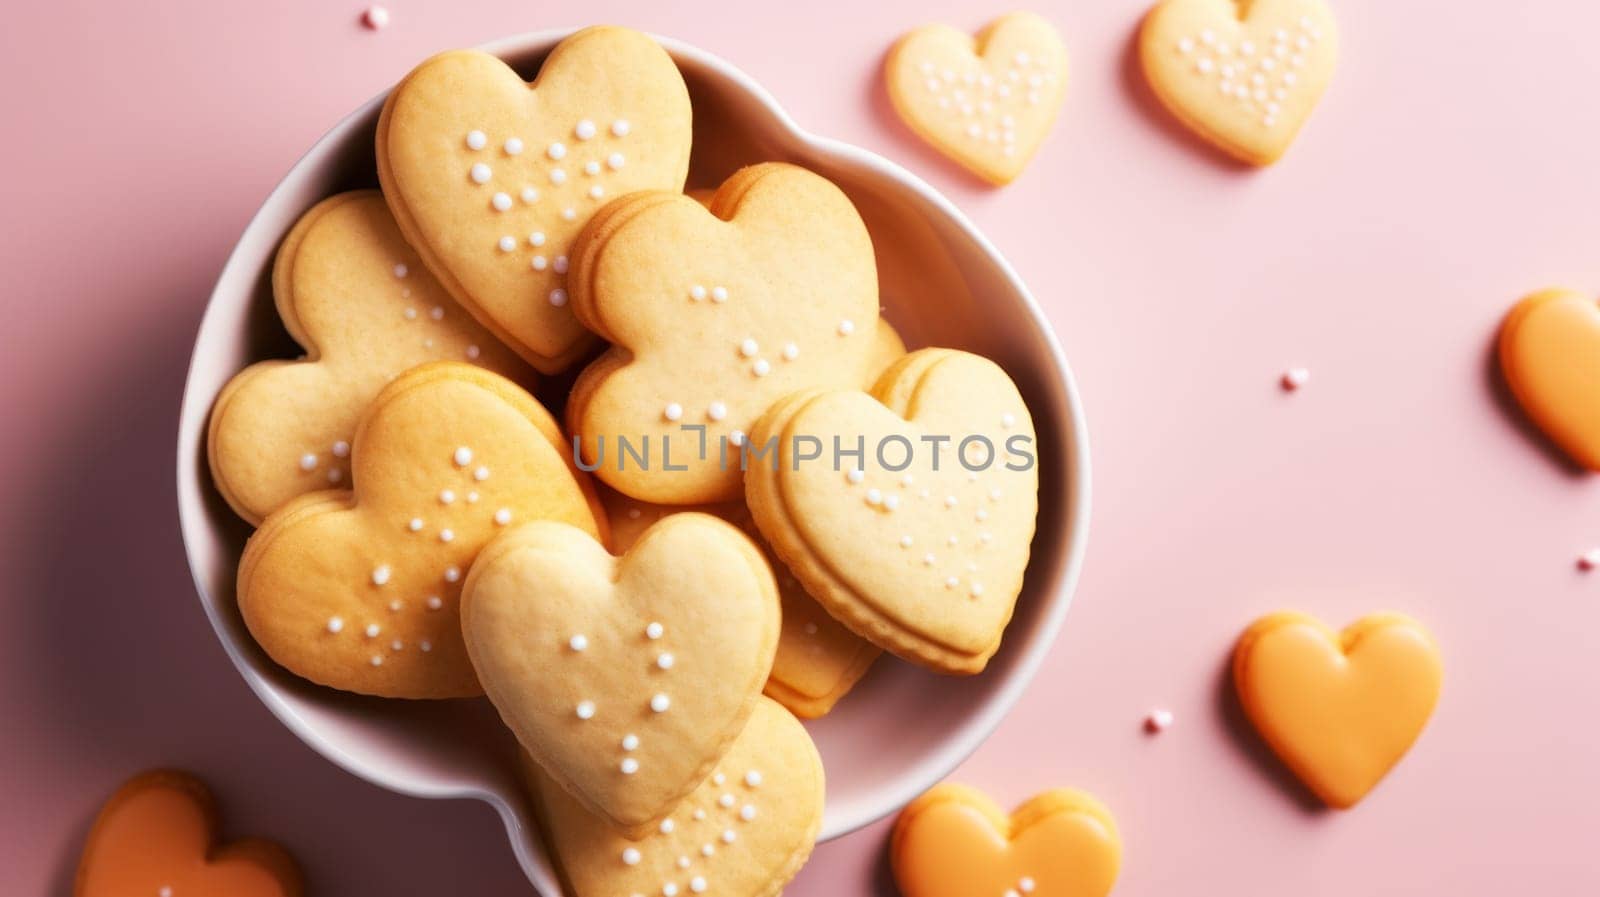 A bowl of heart shaped cookies on a pink background